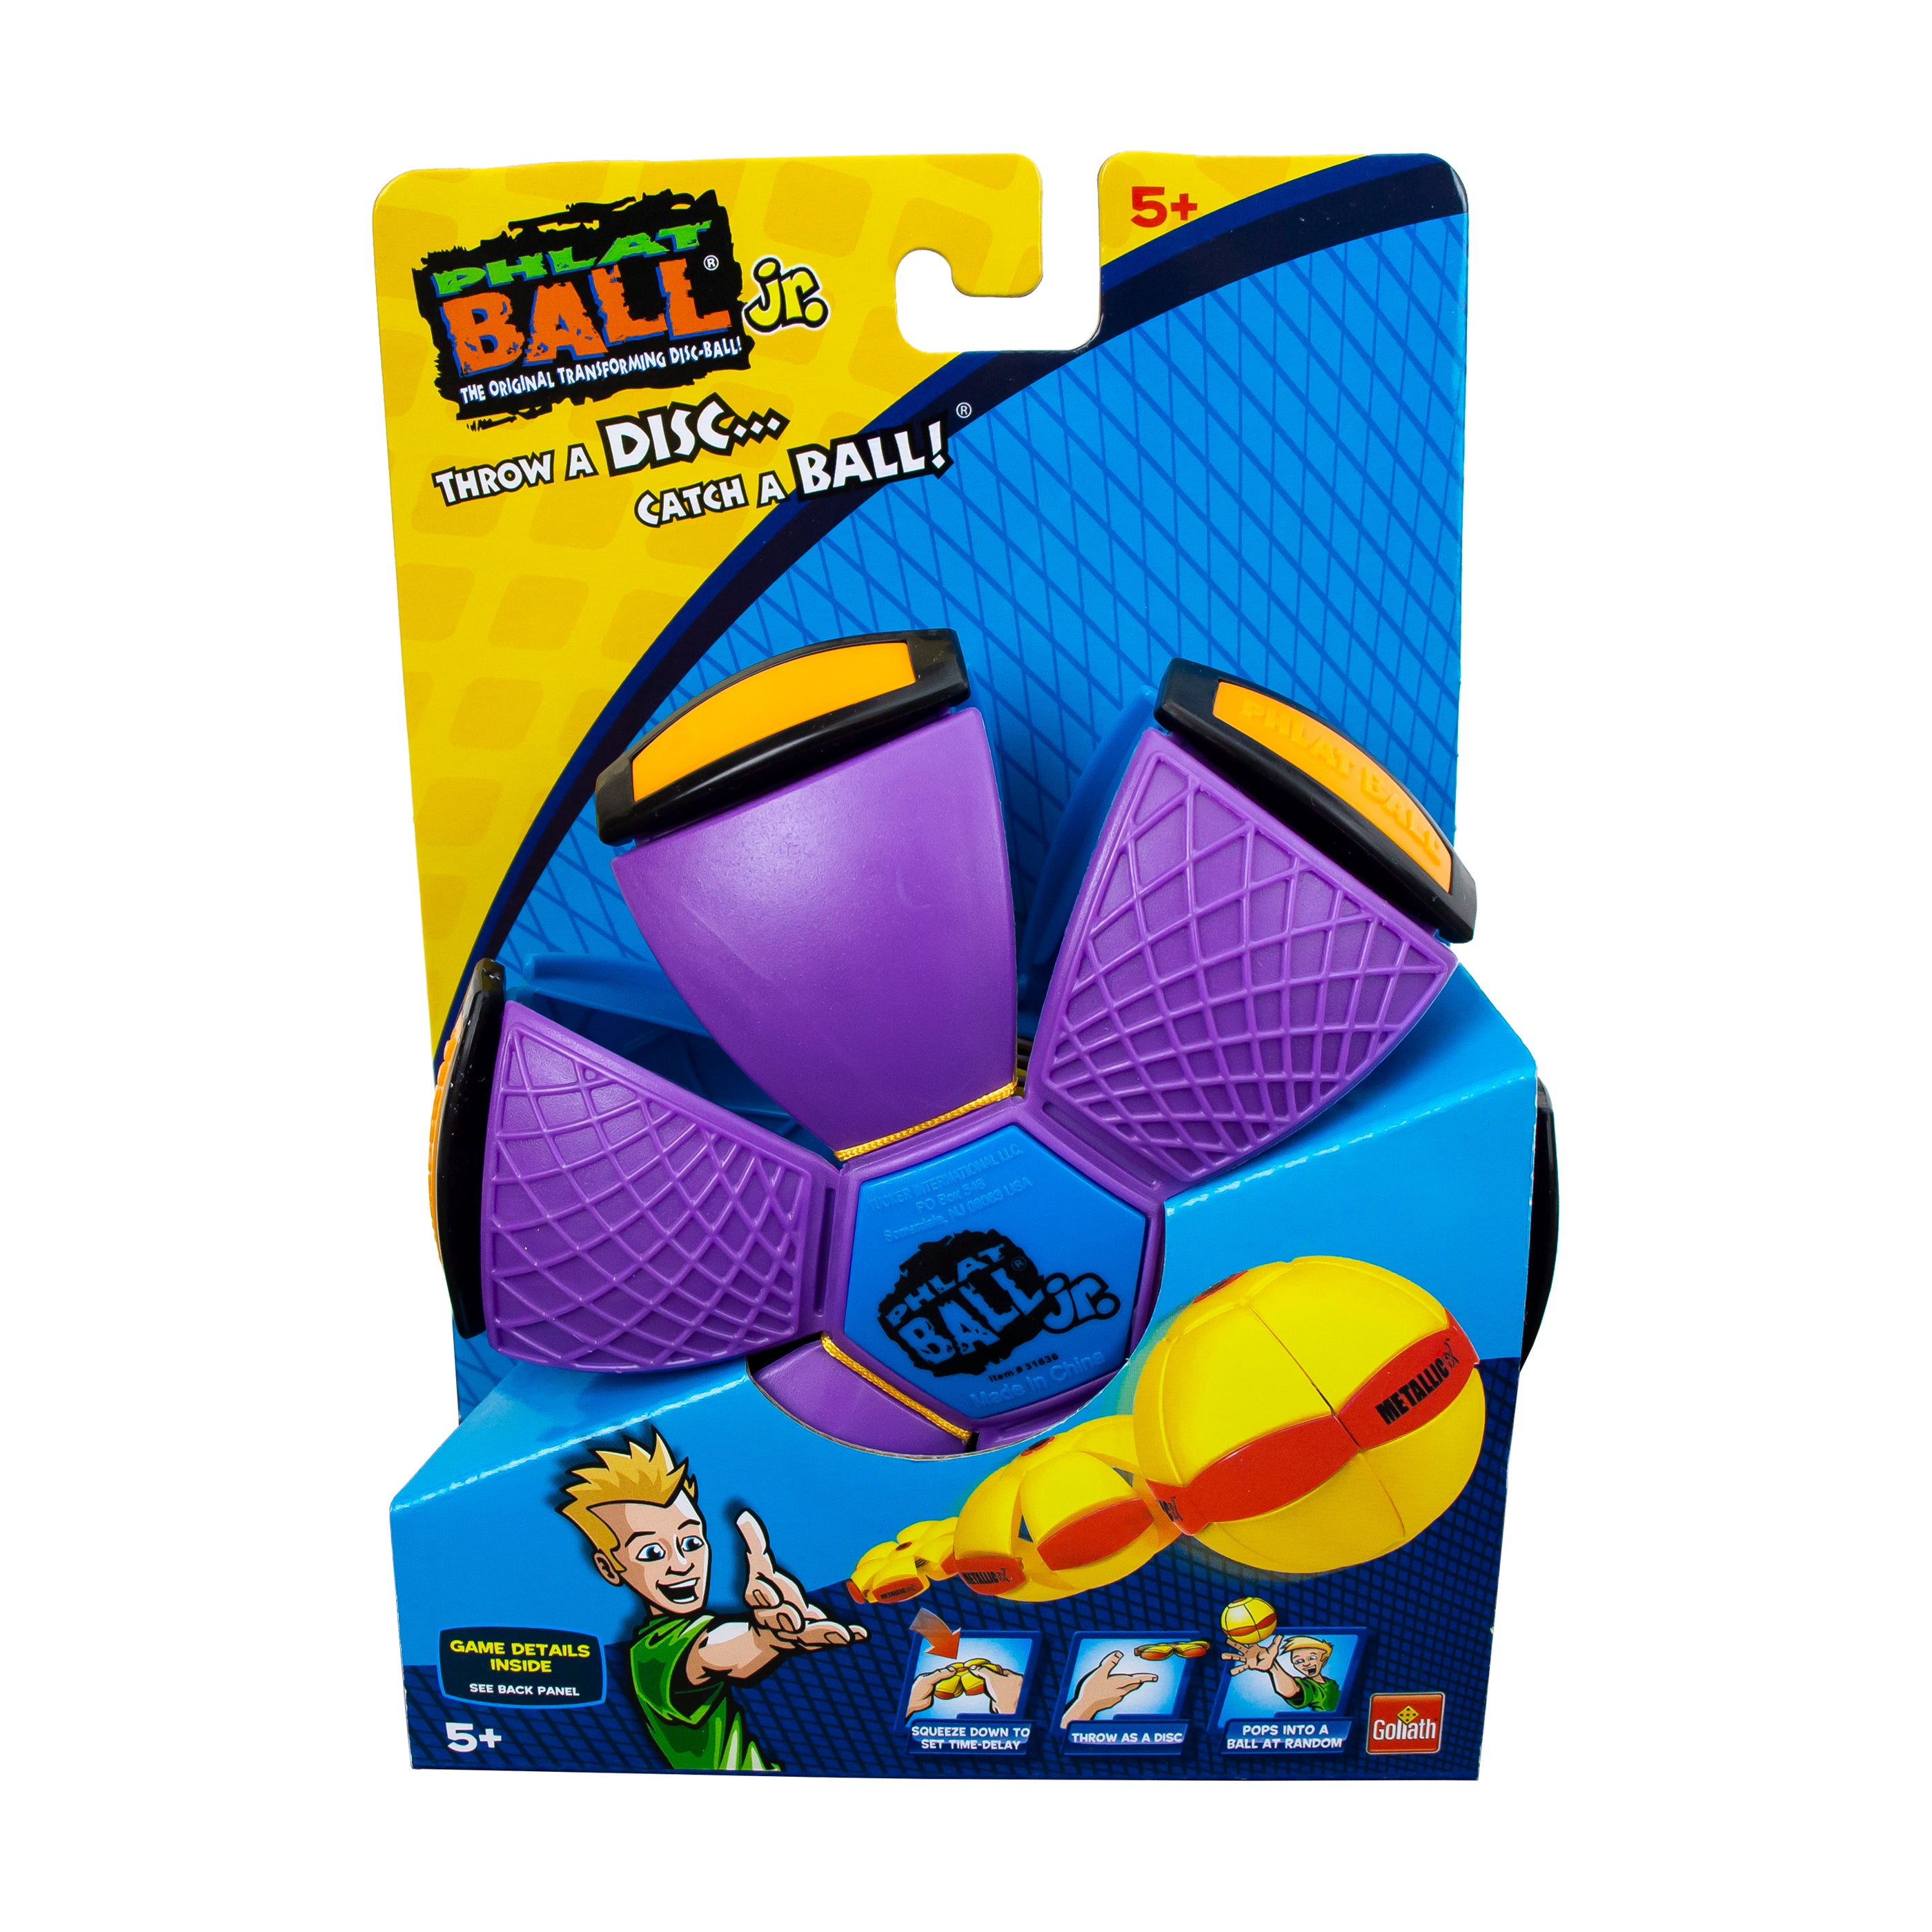 Phlat Ball Review - Our Family Reviews